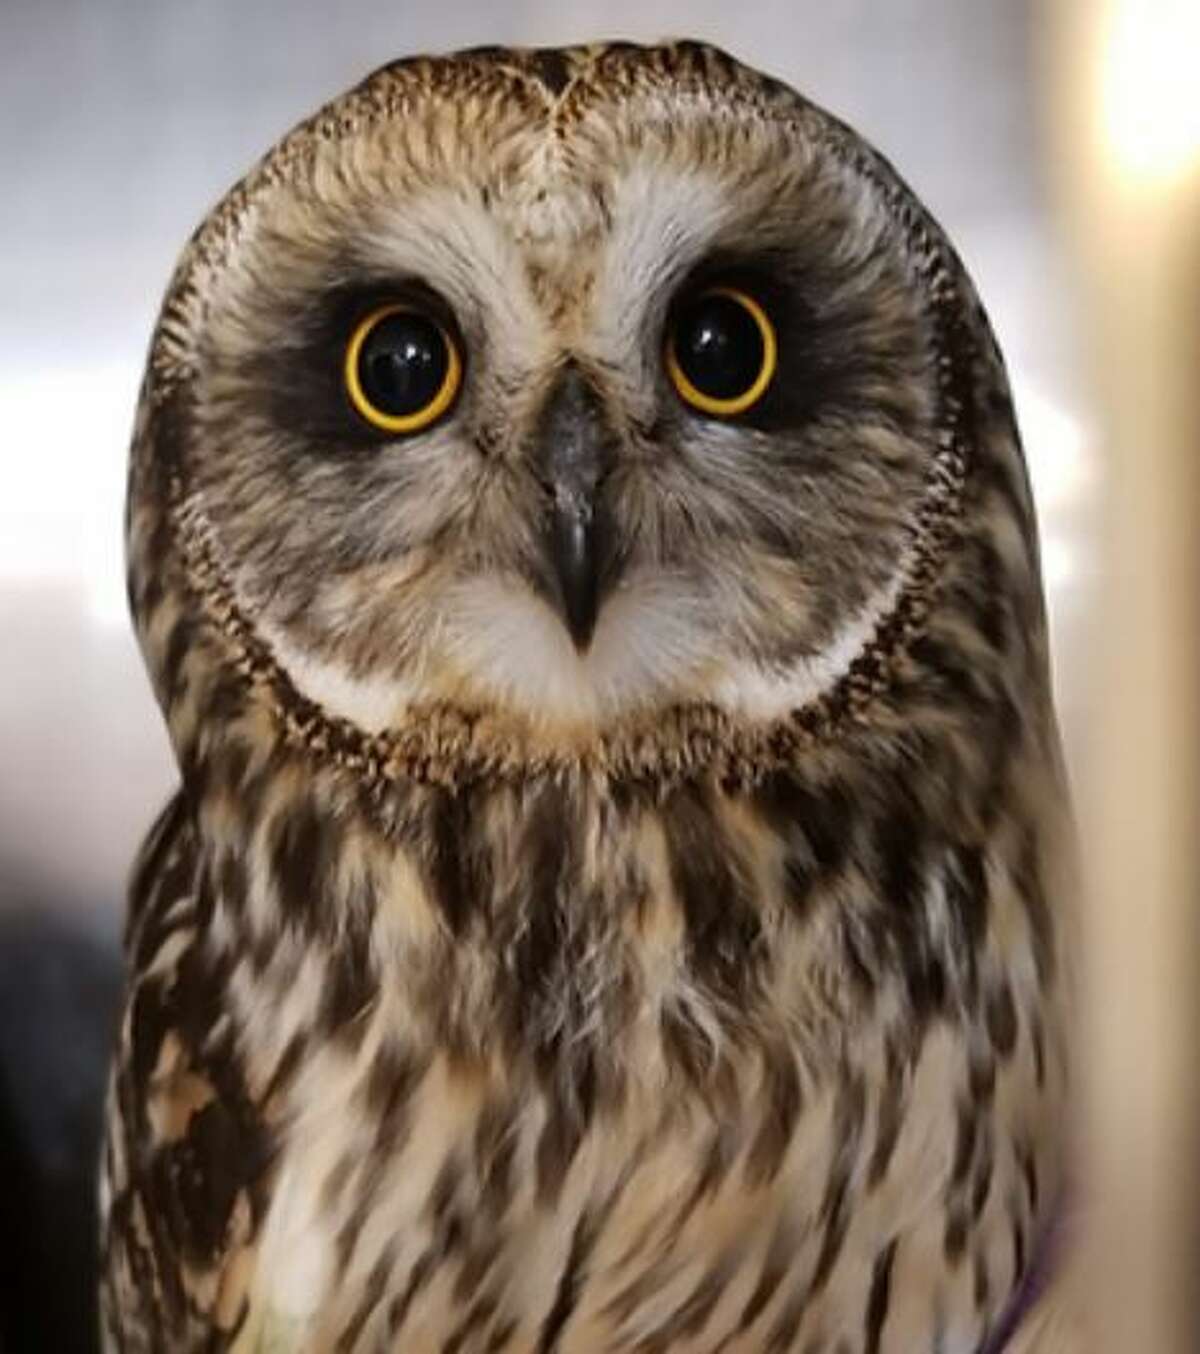 TreeHouse Wildlife Center will host its annual Owl Fest, its largest fundraising event of the year, noon to 5 p.m. Oct. 15 and Oct. 16.